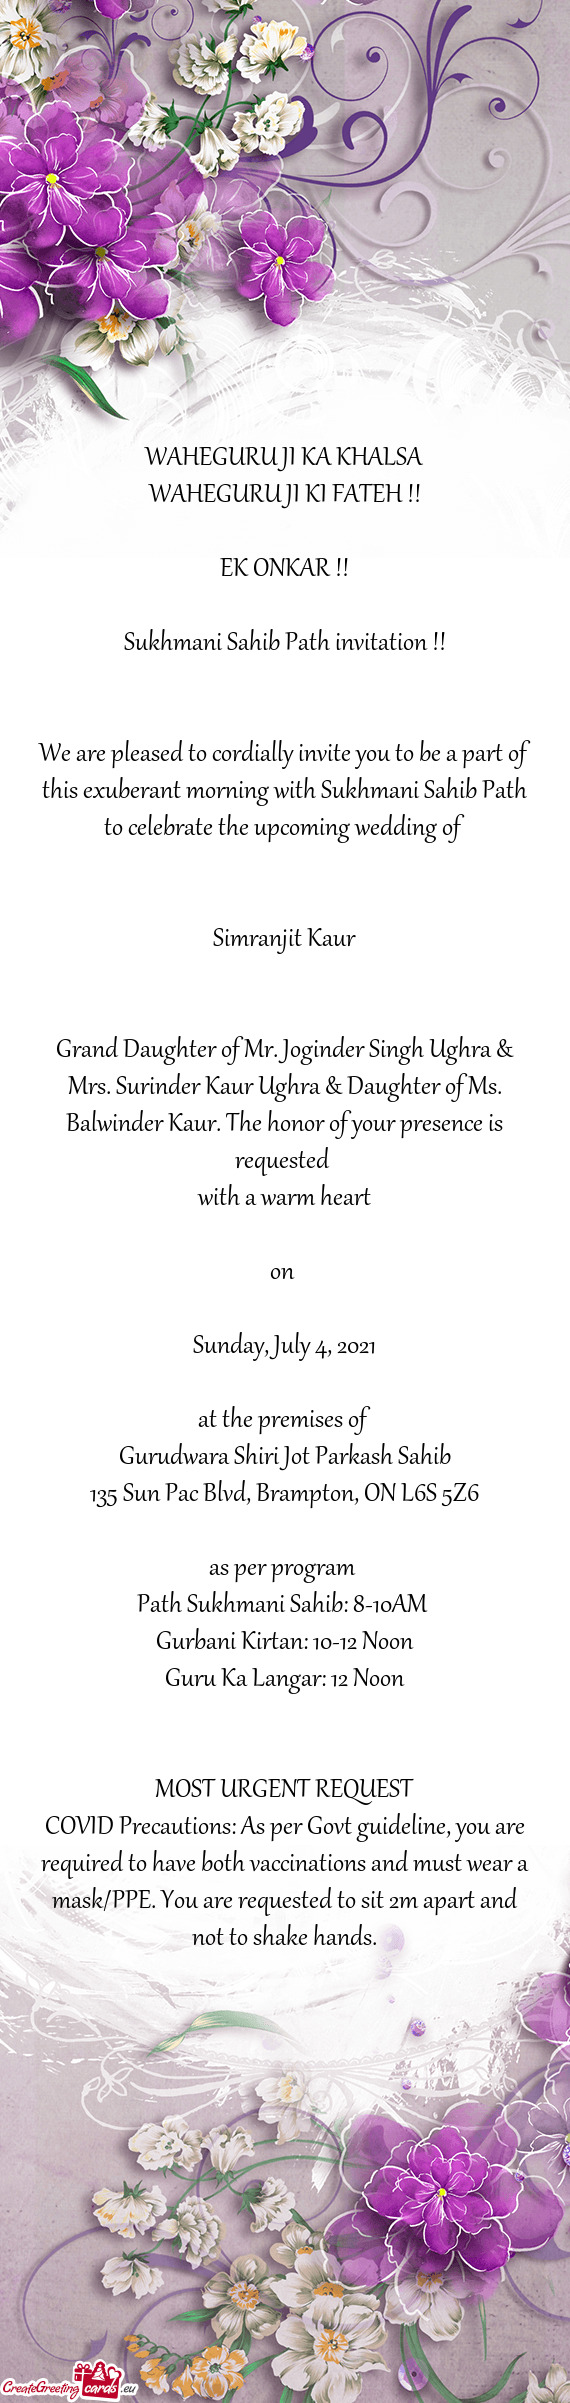 We are pleased to cordially invite you to be a part of this exuberant morning with Sukhmani Sahib Pa